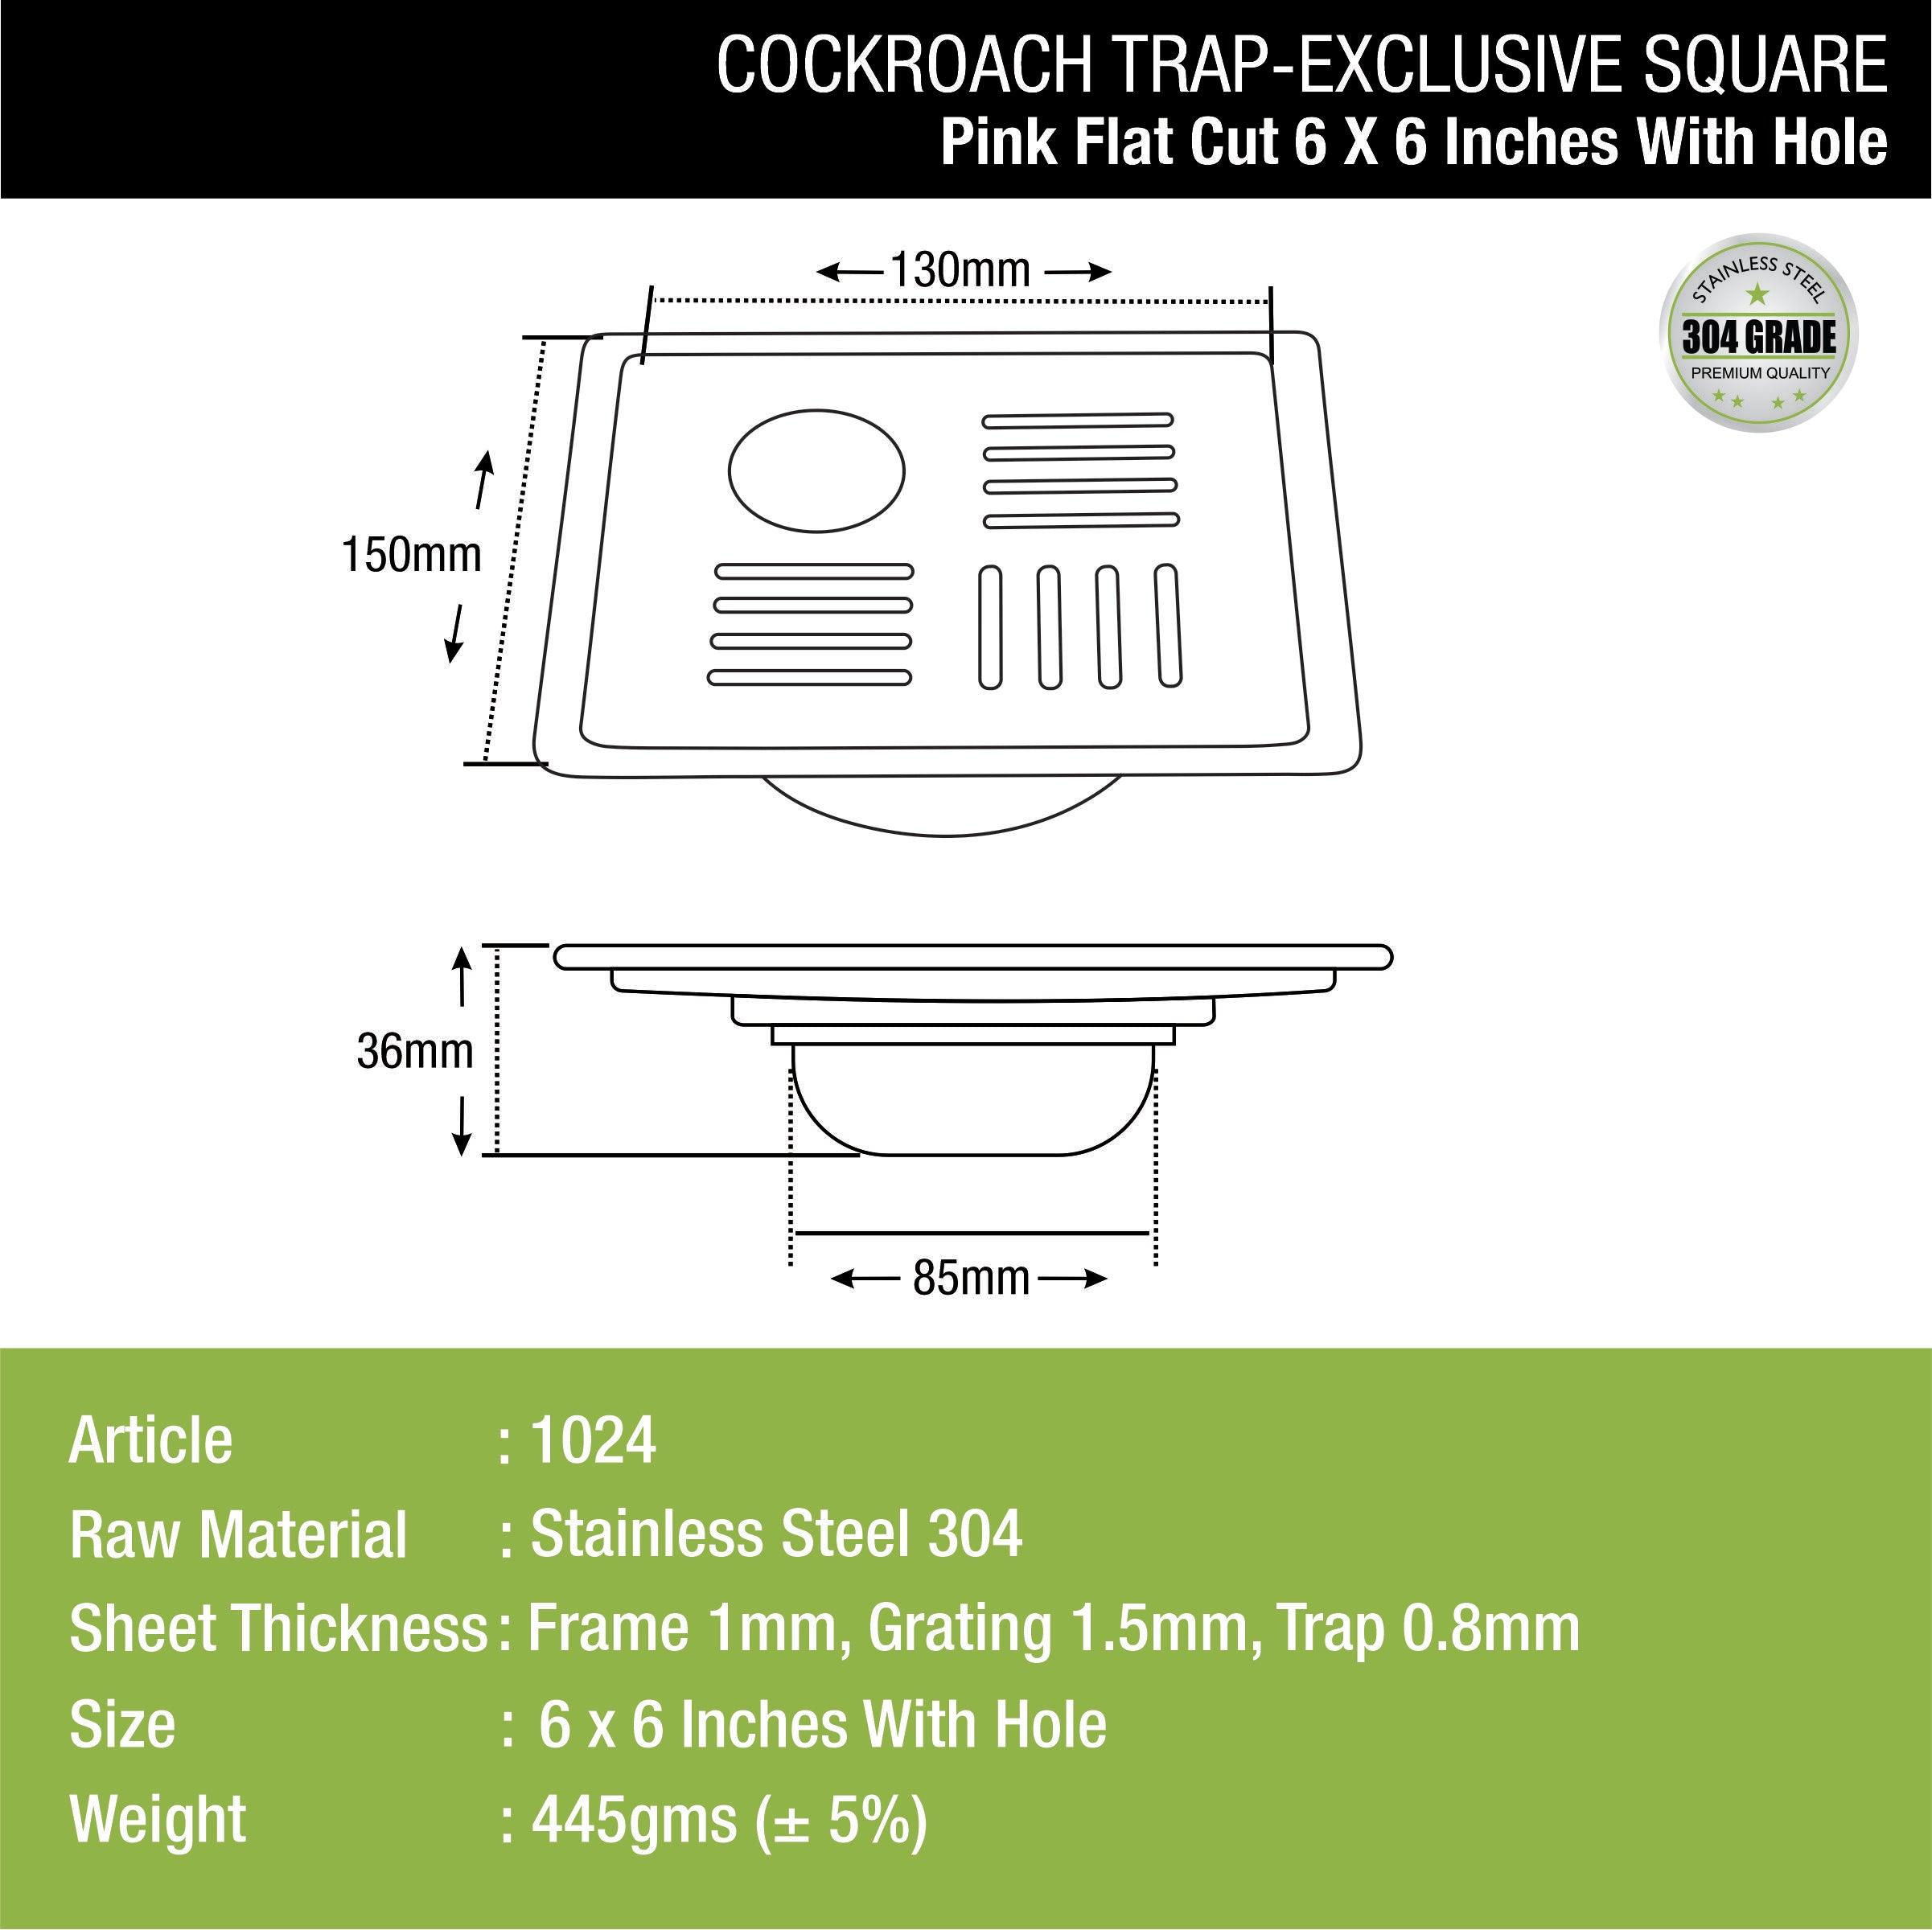 Pink Exclusive Square Flat Cut Floor Drain (6 x 6 Inches) with Hole and Cockroach Trap dimensions and sizes